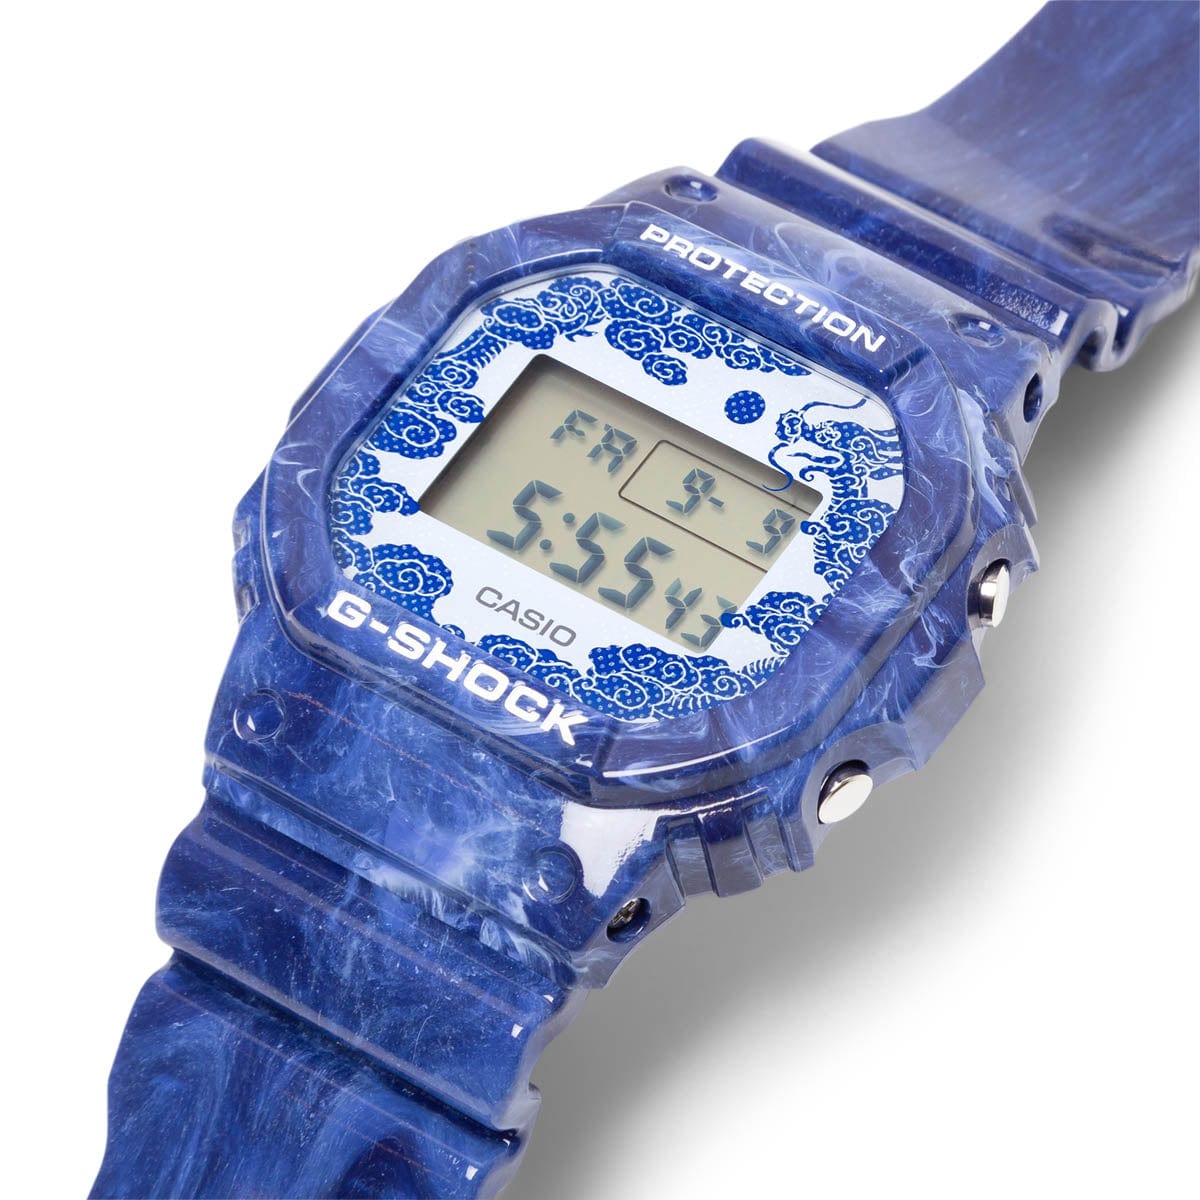 G-Shock Accessories - Watches BLUE / O/S DW5600BWP-2